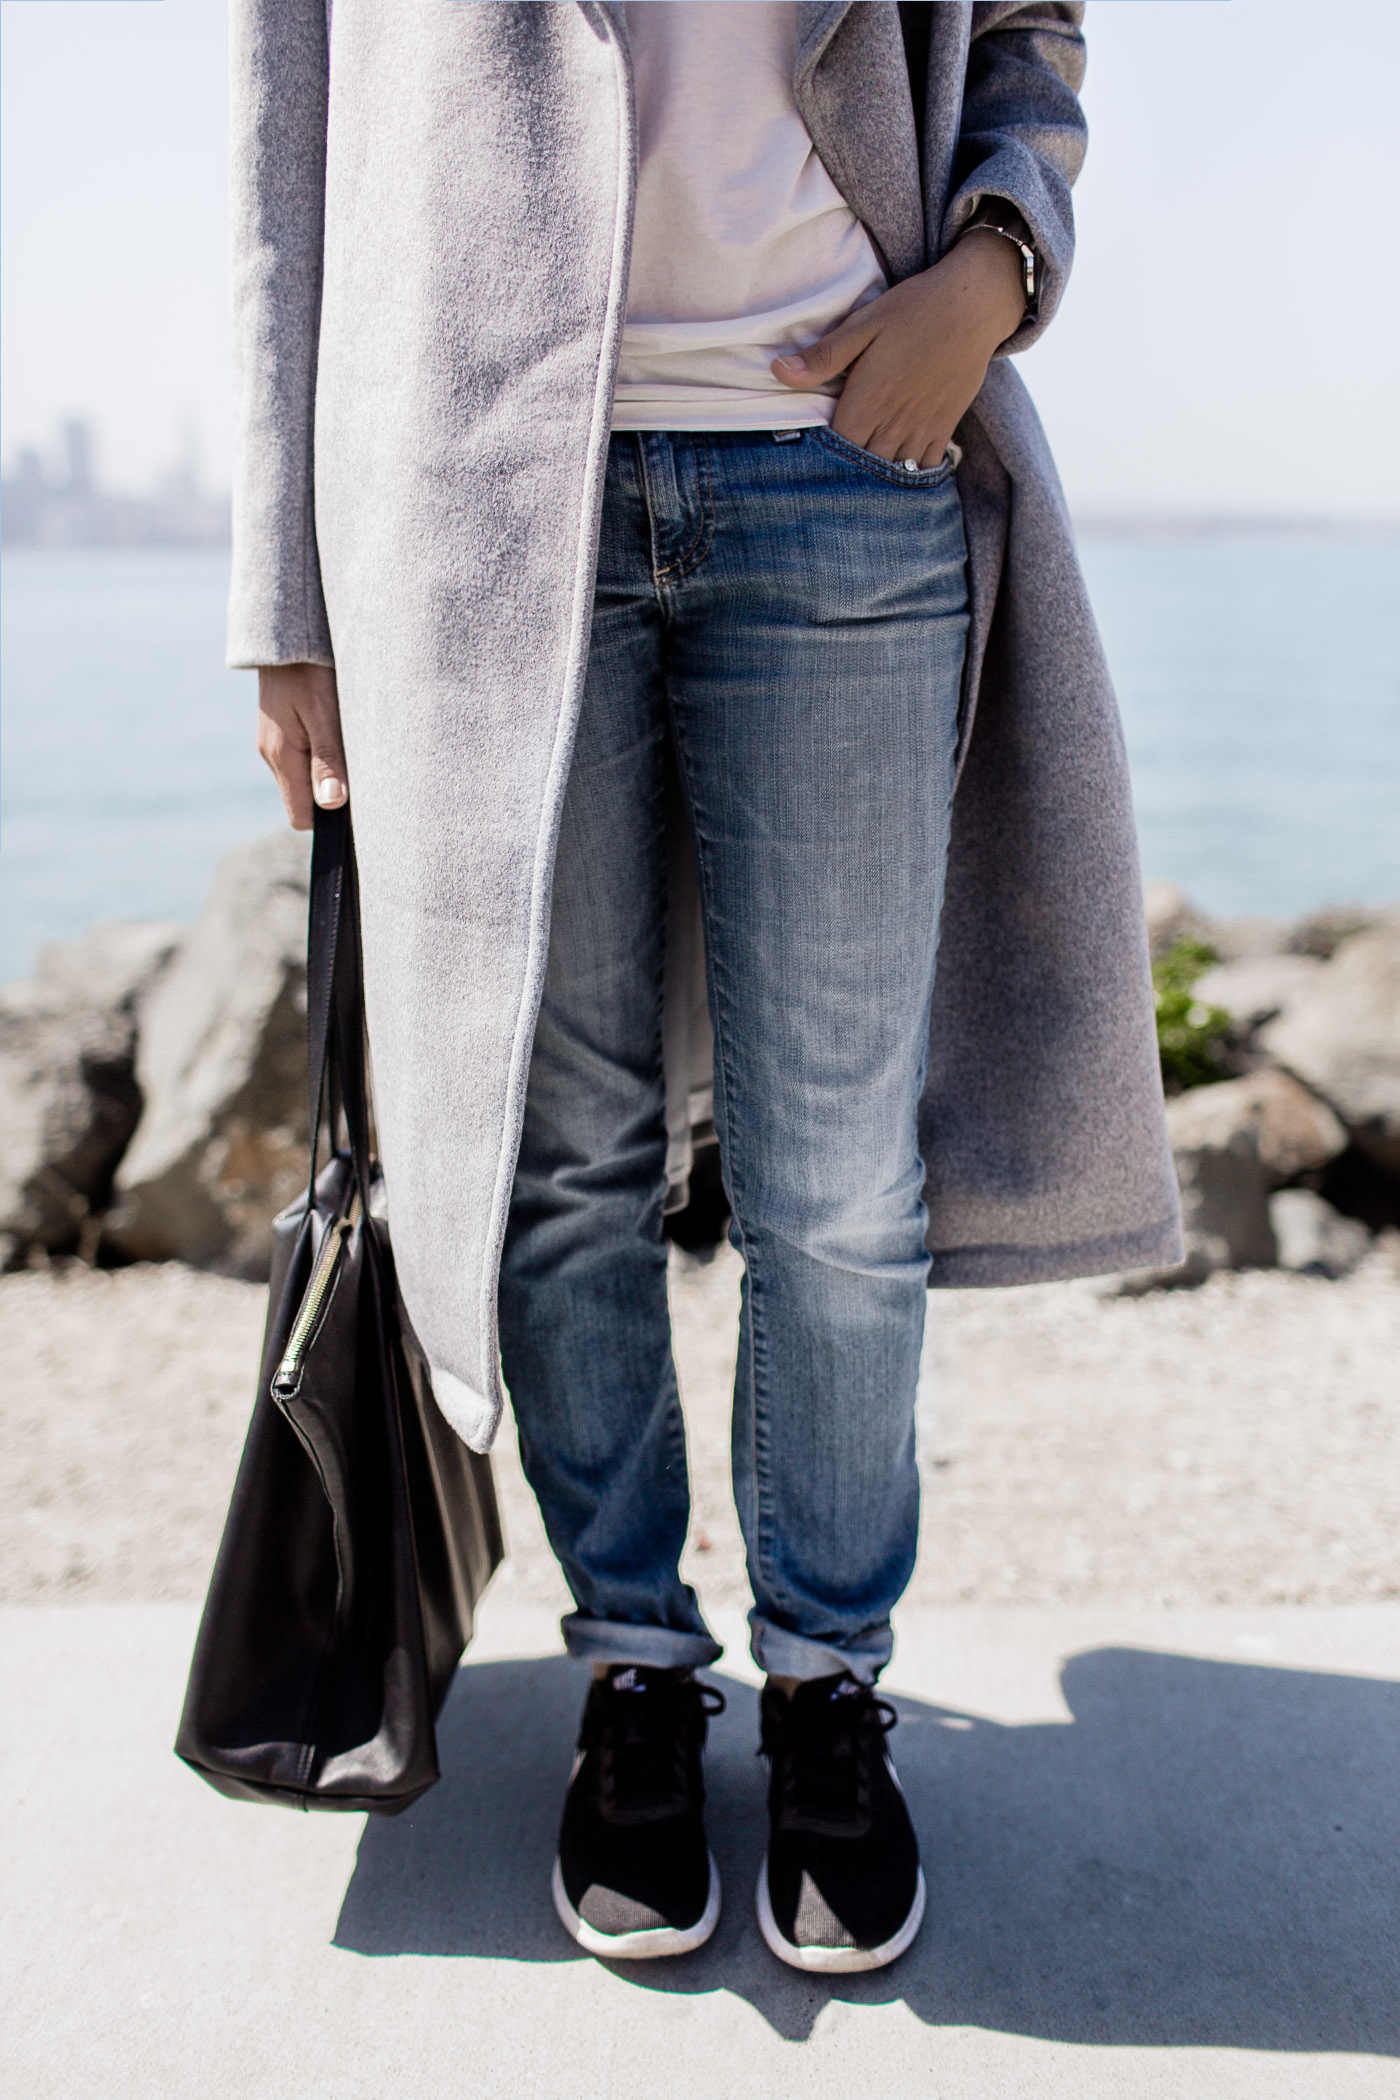 Winter outfit with gray wool coat and nike shoes